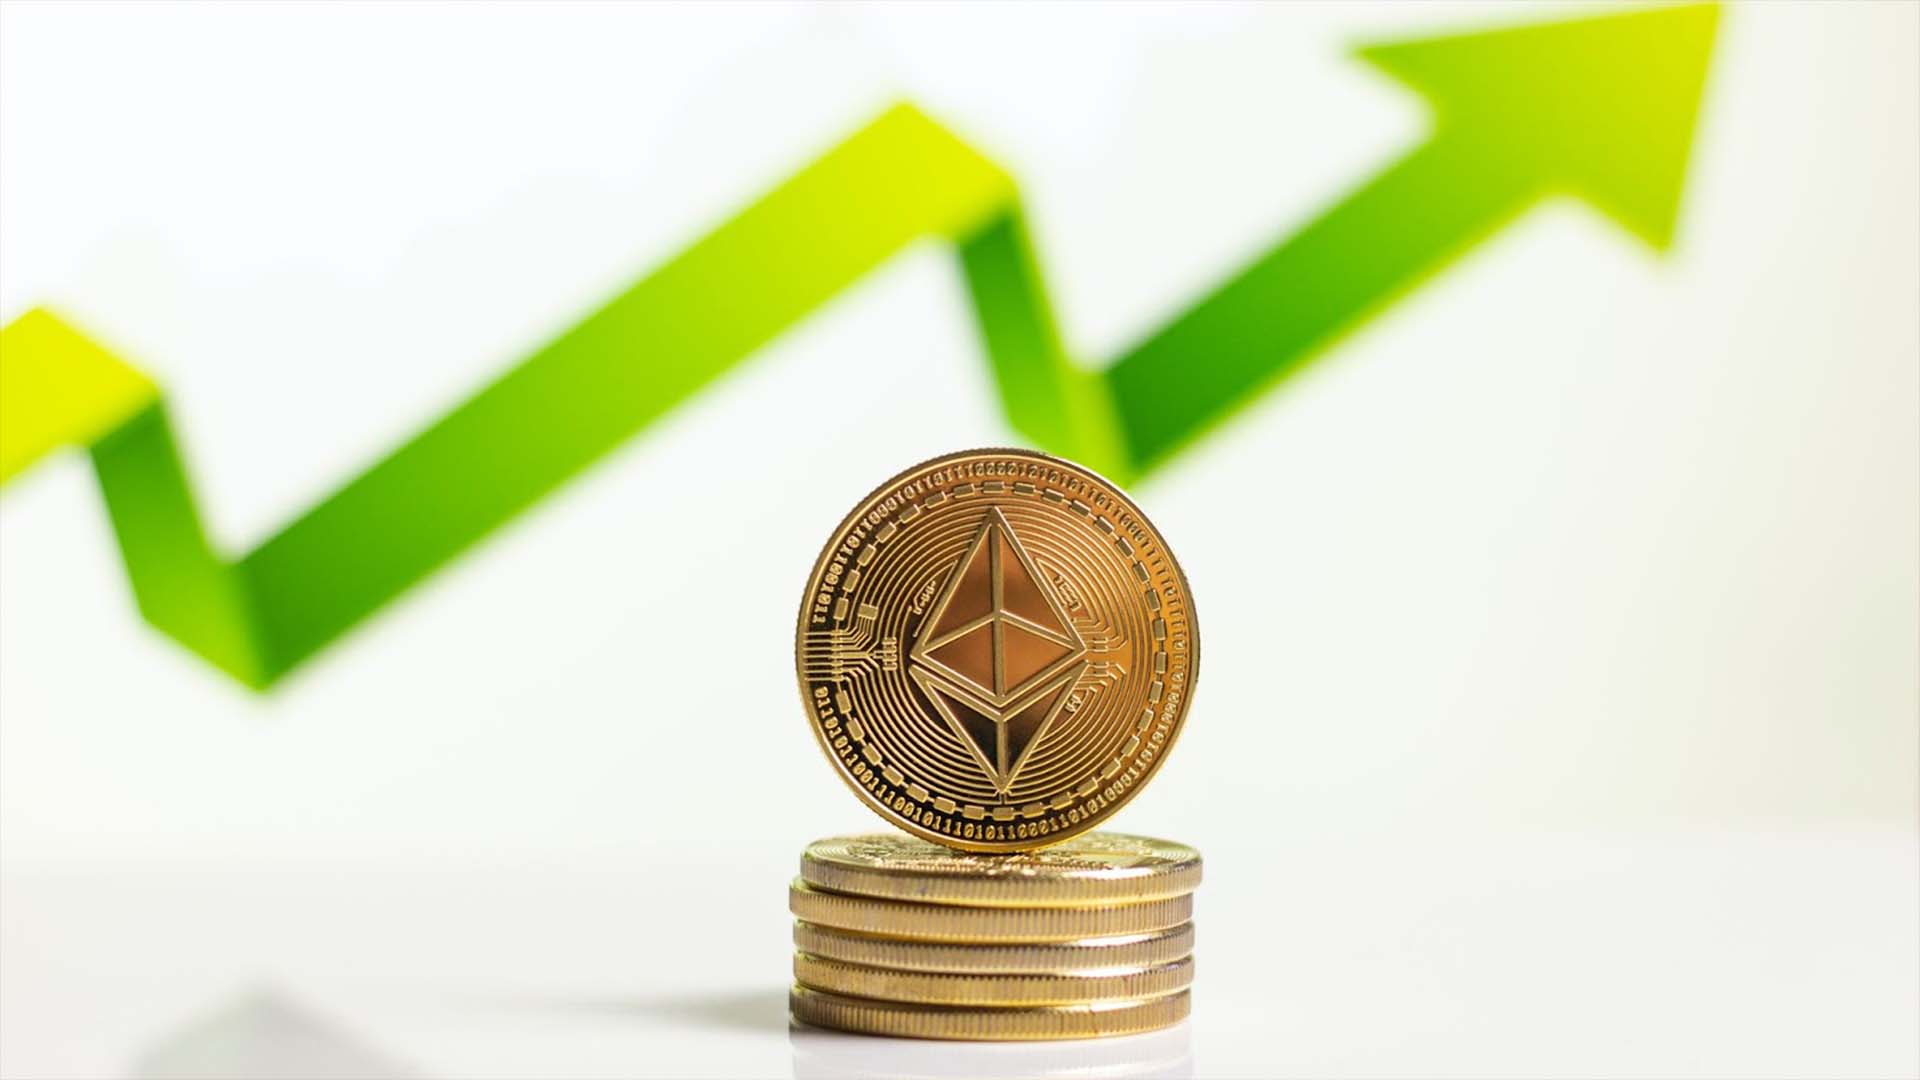 Understanding why Ethereum is going down is key to making money in bear market, says Avorak